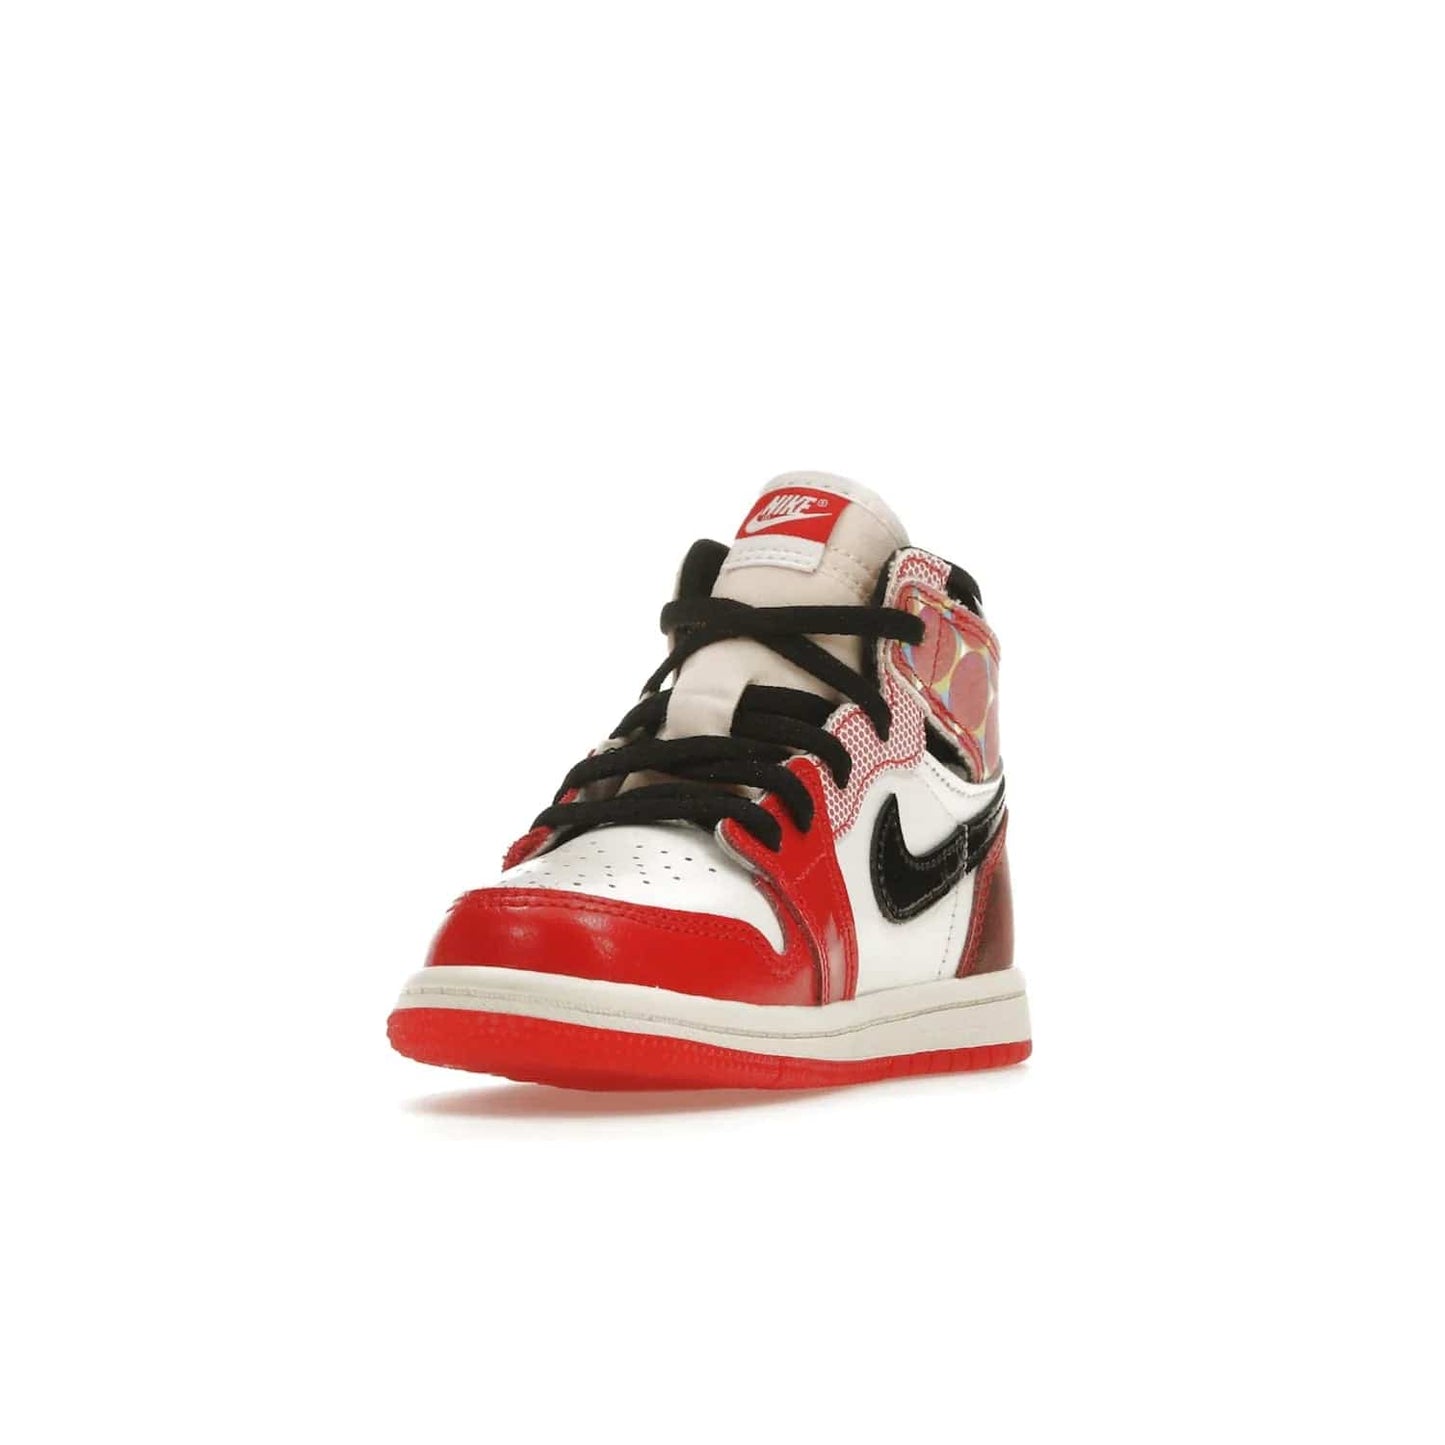 Jordan 1 High OG Spider-Man Across the Spider-Verse (TD) - Image 13 - Only at www.BallersClubKickz.com - The University Red/Black/White Spider-Man Across the Spider-Verse Air Jordan 1 High OG features bold accents and an eye-catching design. Releasing May 2023.